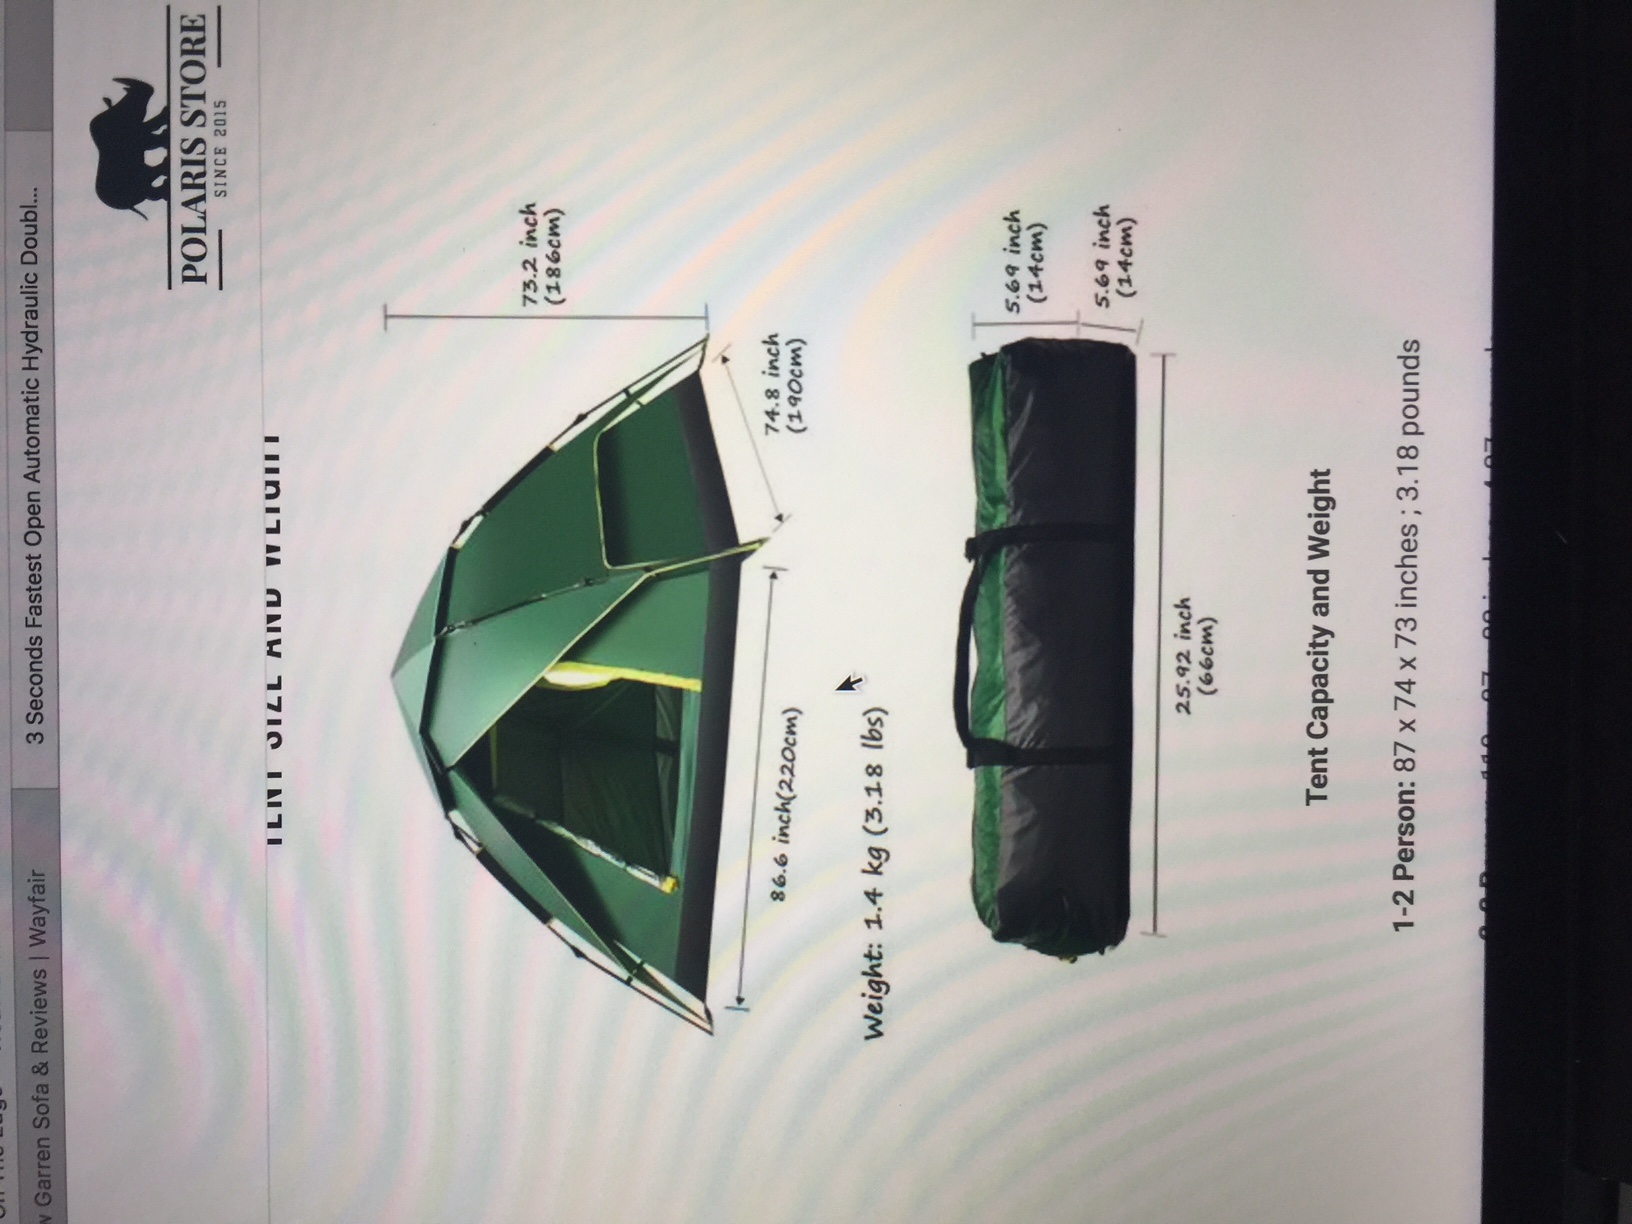 advertised as a fully hydraulic tent